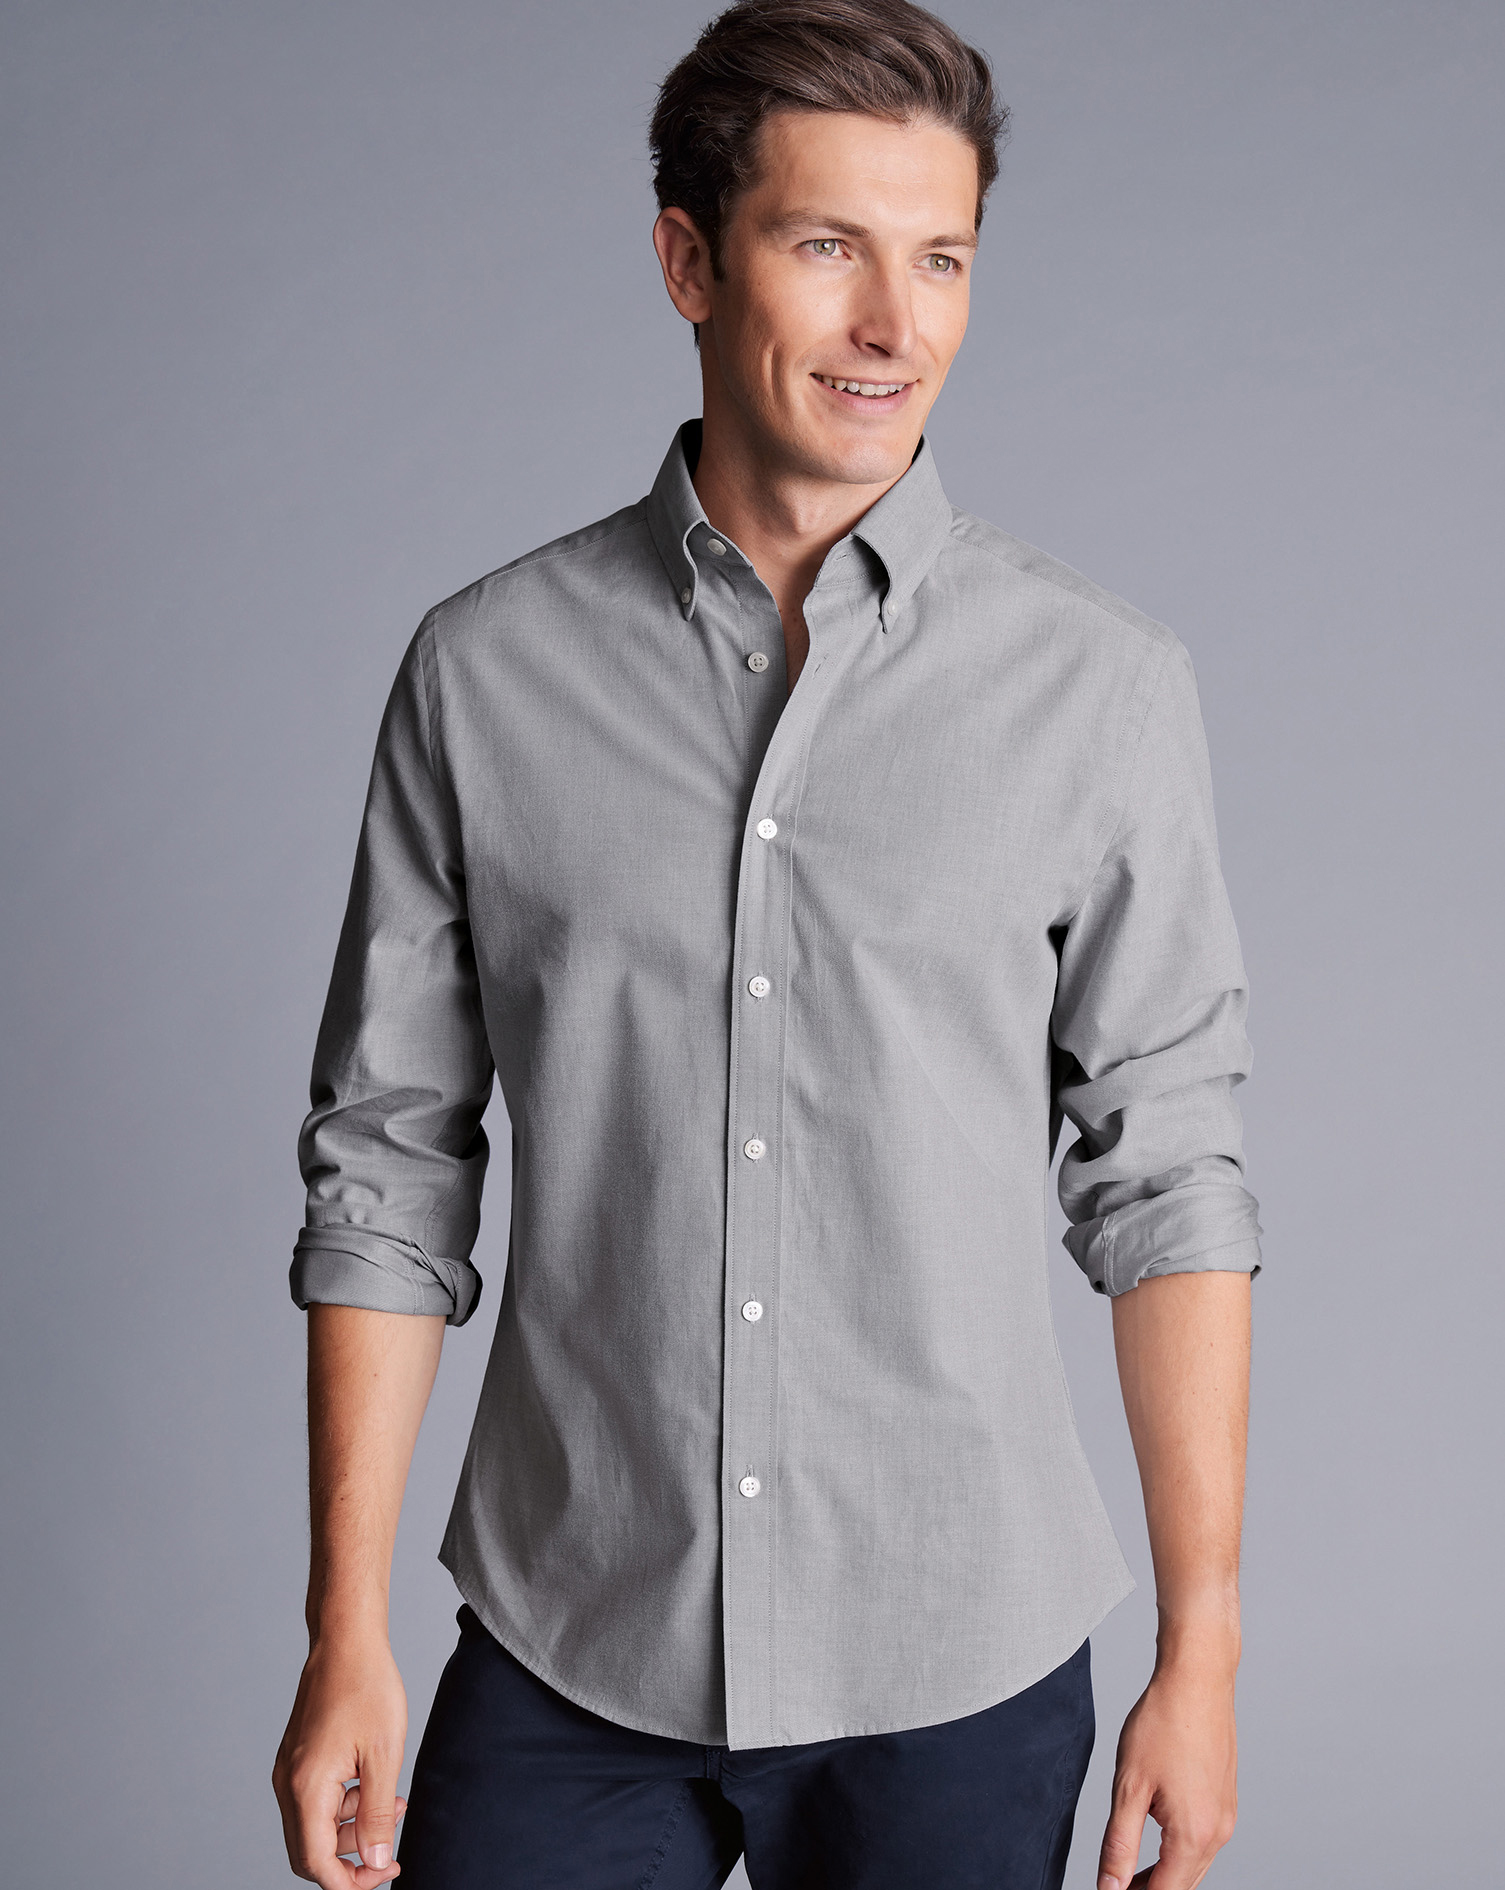 Men's Band Collar Button Down Shirt In Cement Gray 100% Cotton